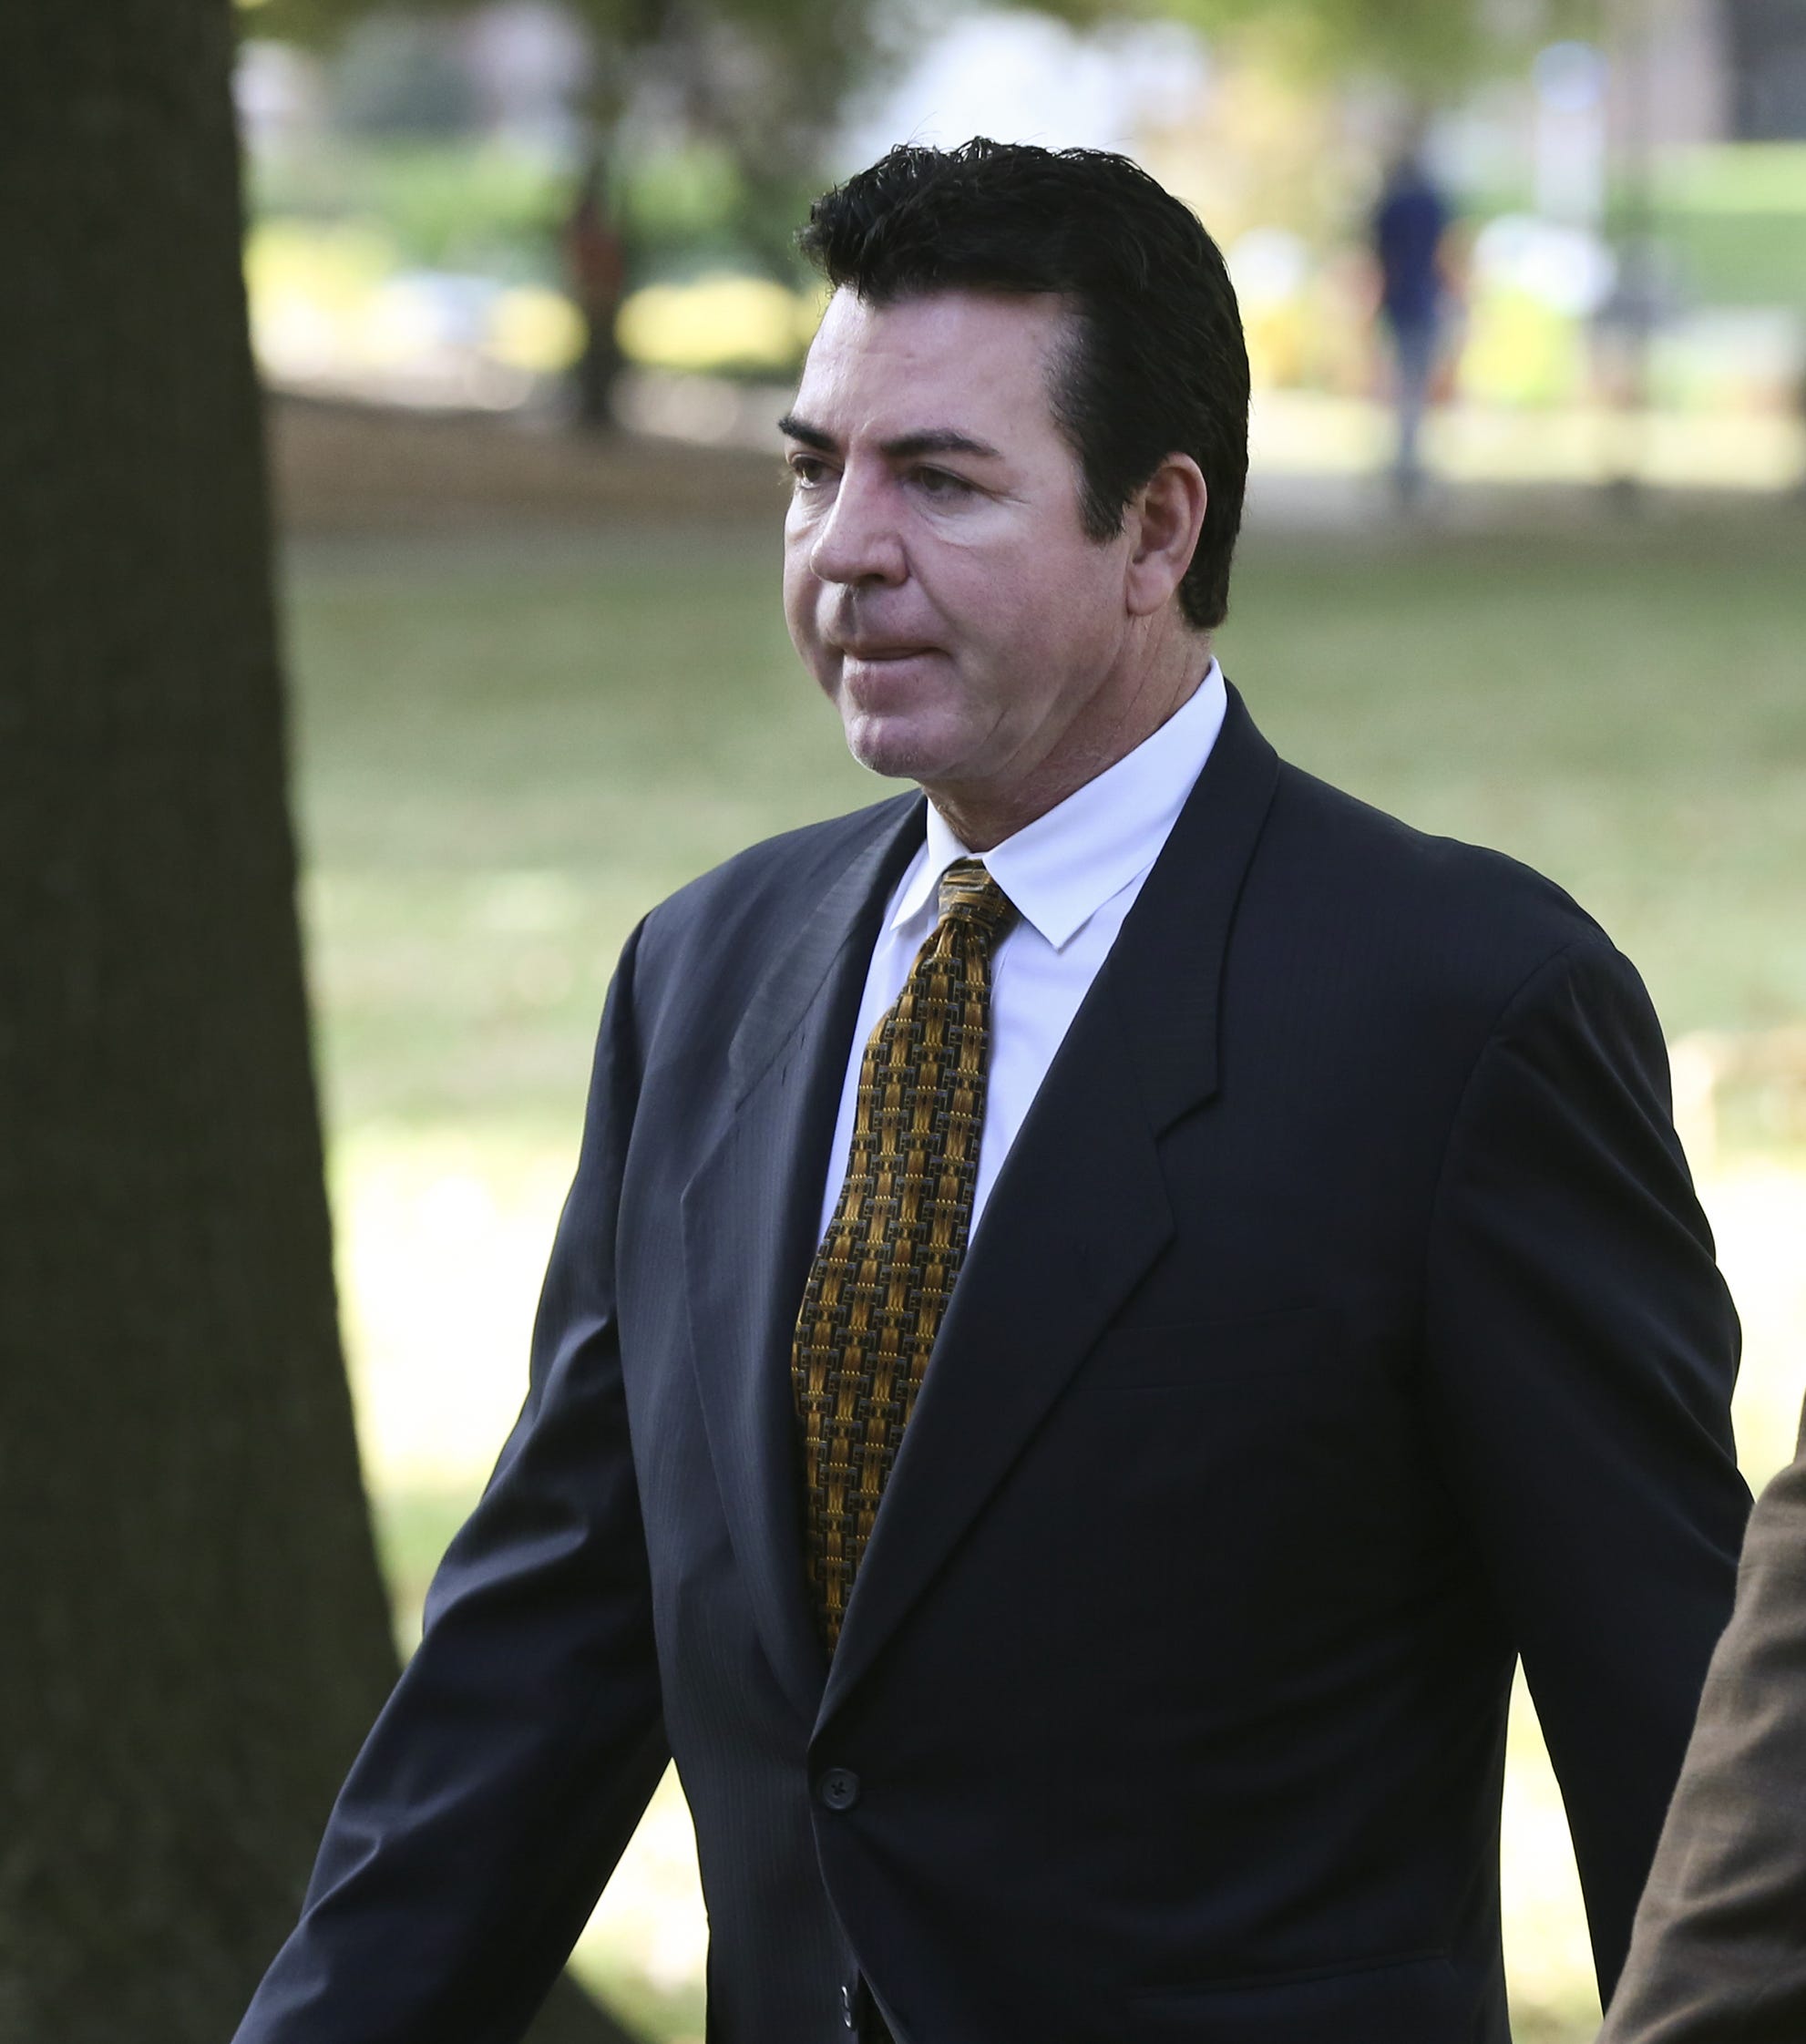 Papa John's founder John Schnatter to give gift to Simmons College